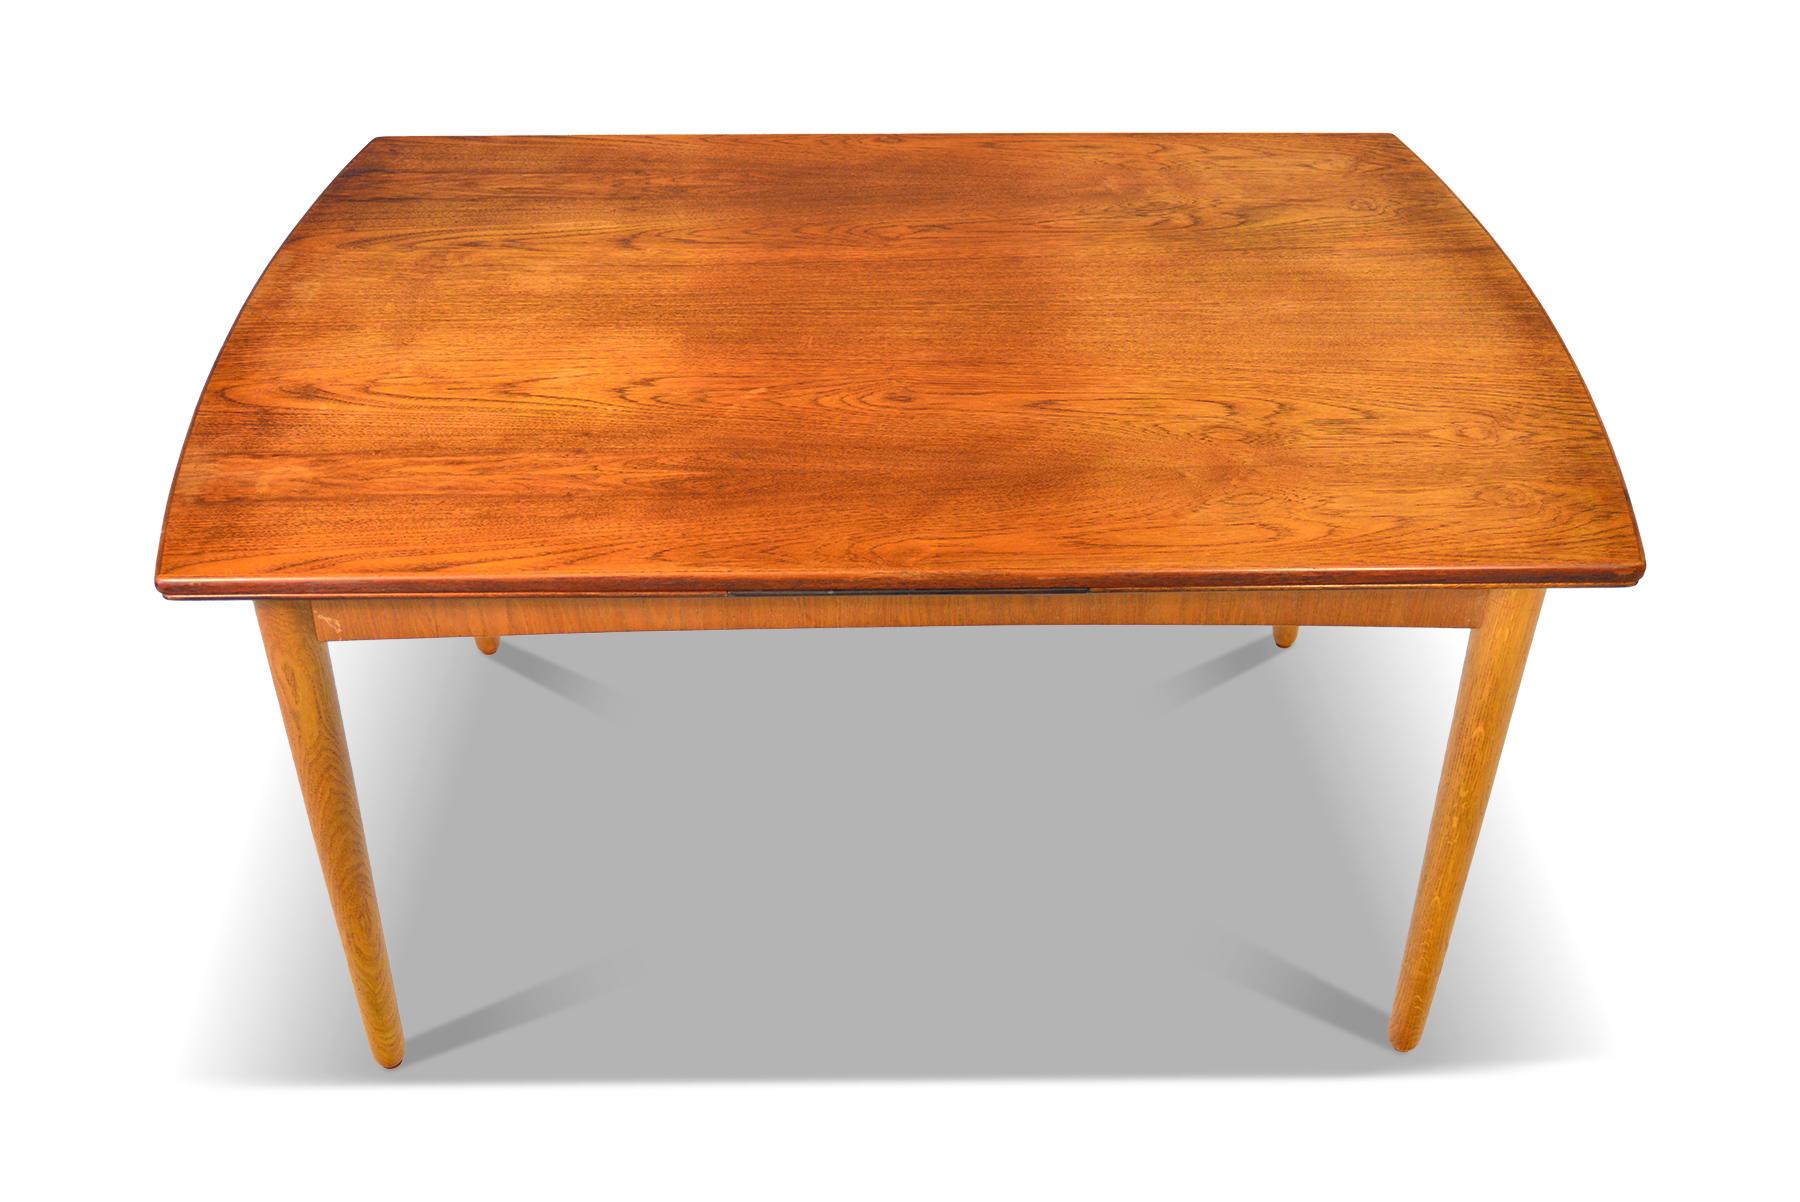 Origin: Denmark
Designer: Unknown
Manufacturer: Unknown
Era: 1960s
Materials: Teak, oak
Measurements: 53 long x 35.5 wide x 29.5 tall
Expanded (both leaves): 91 long x 35.5 wide x 29.5 tall

Condition: In good original condition with some